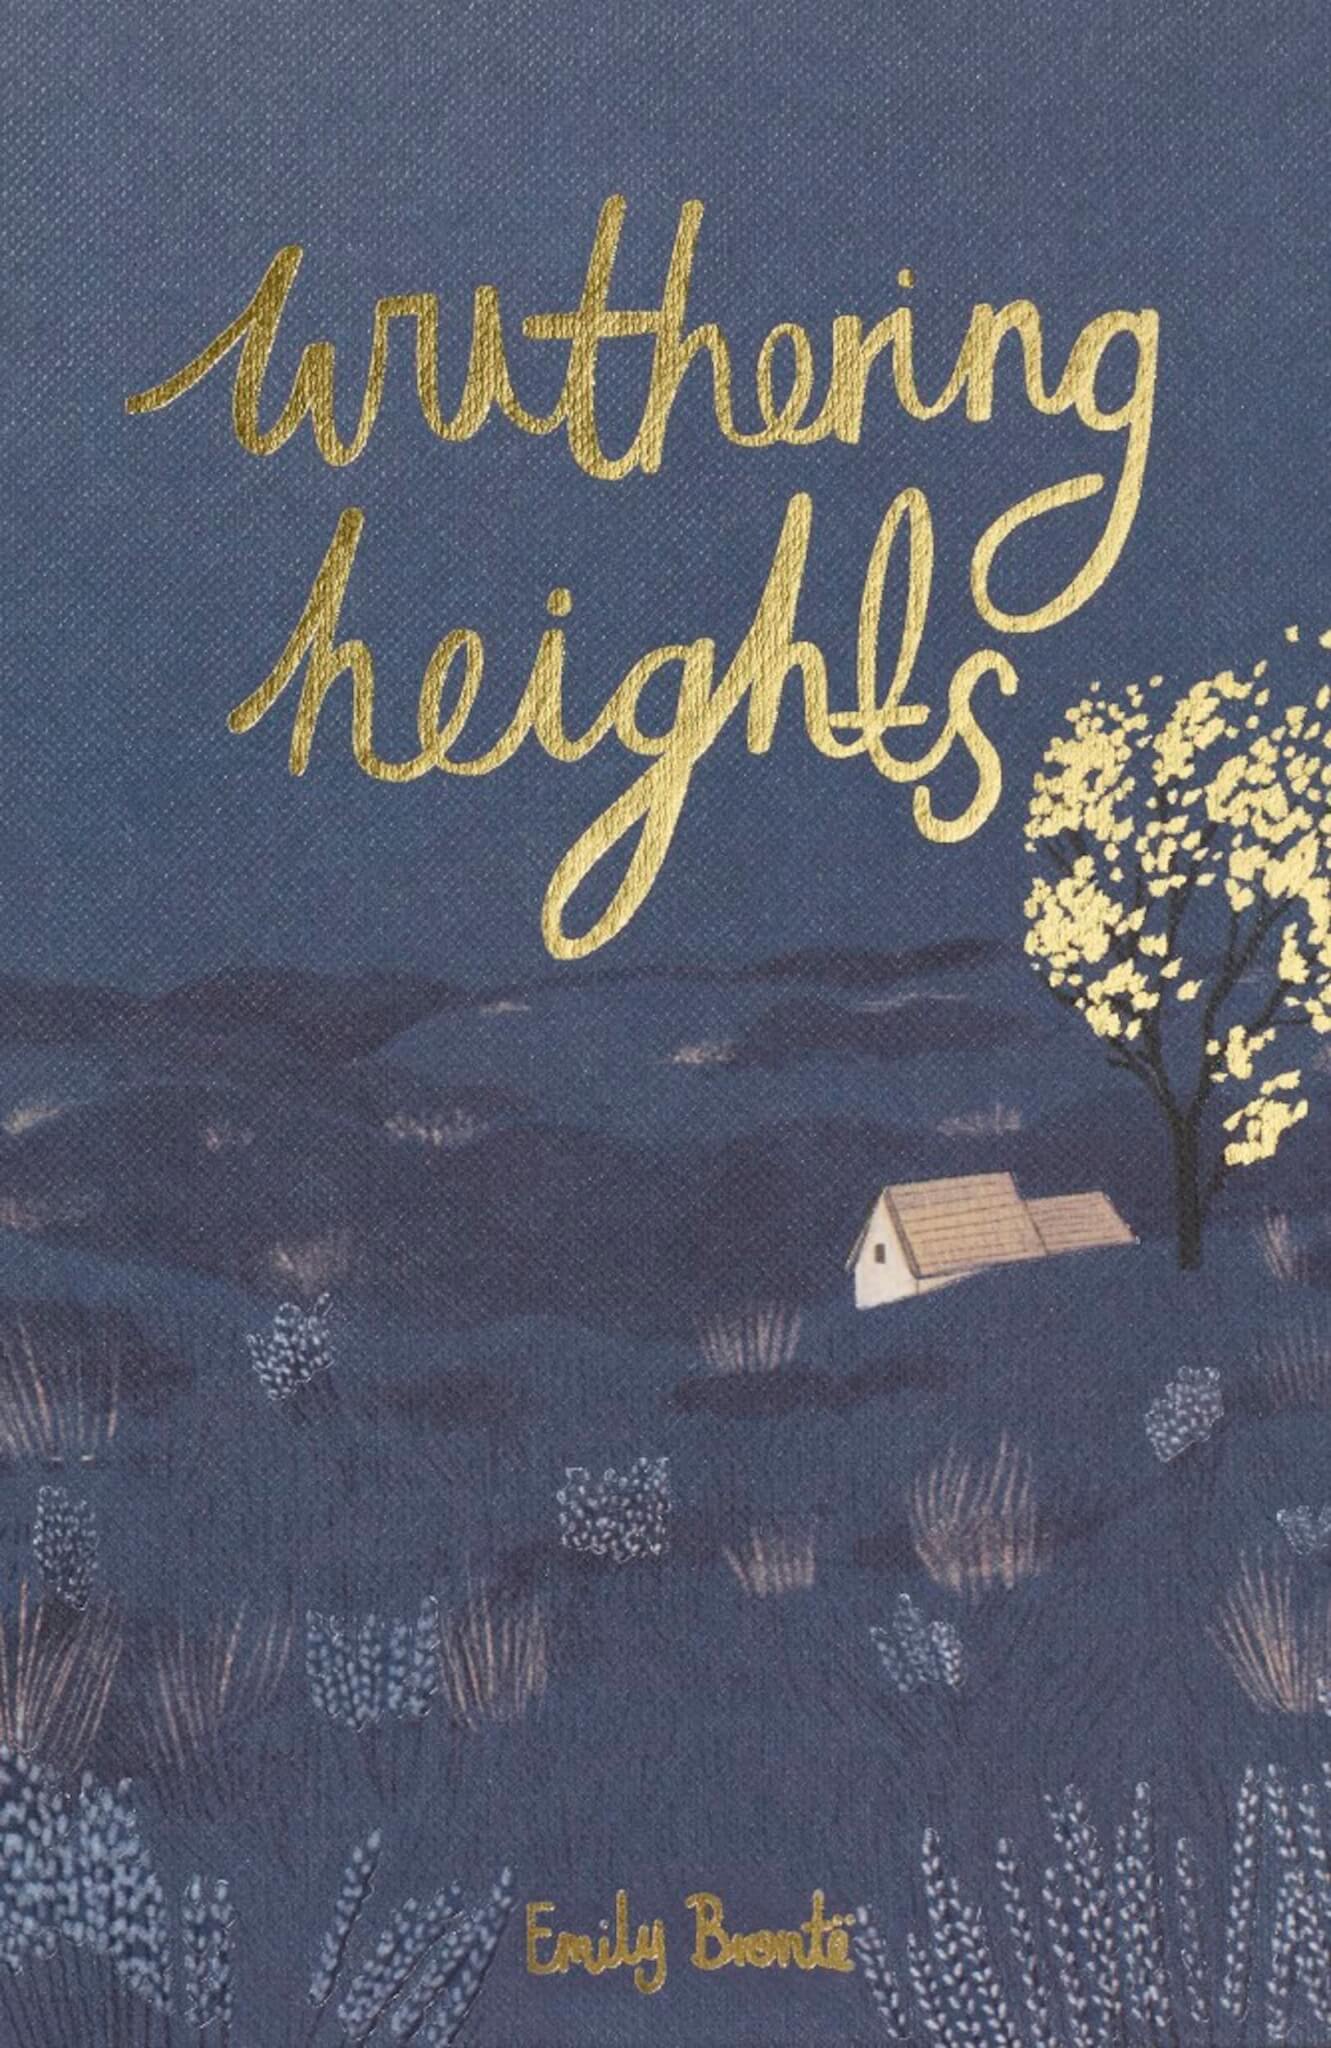 "Wuthering Heights" by Emily Brontë